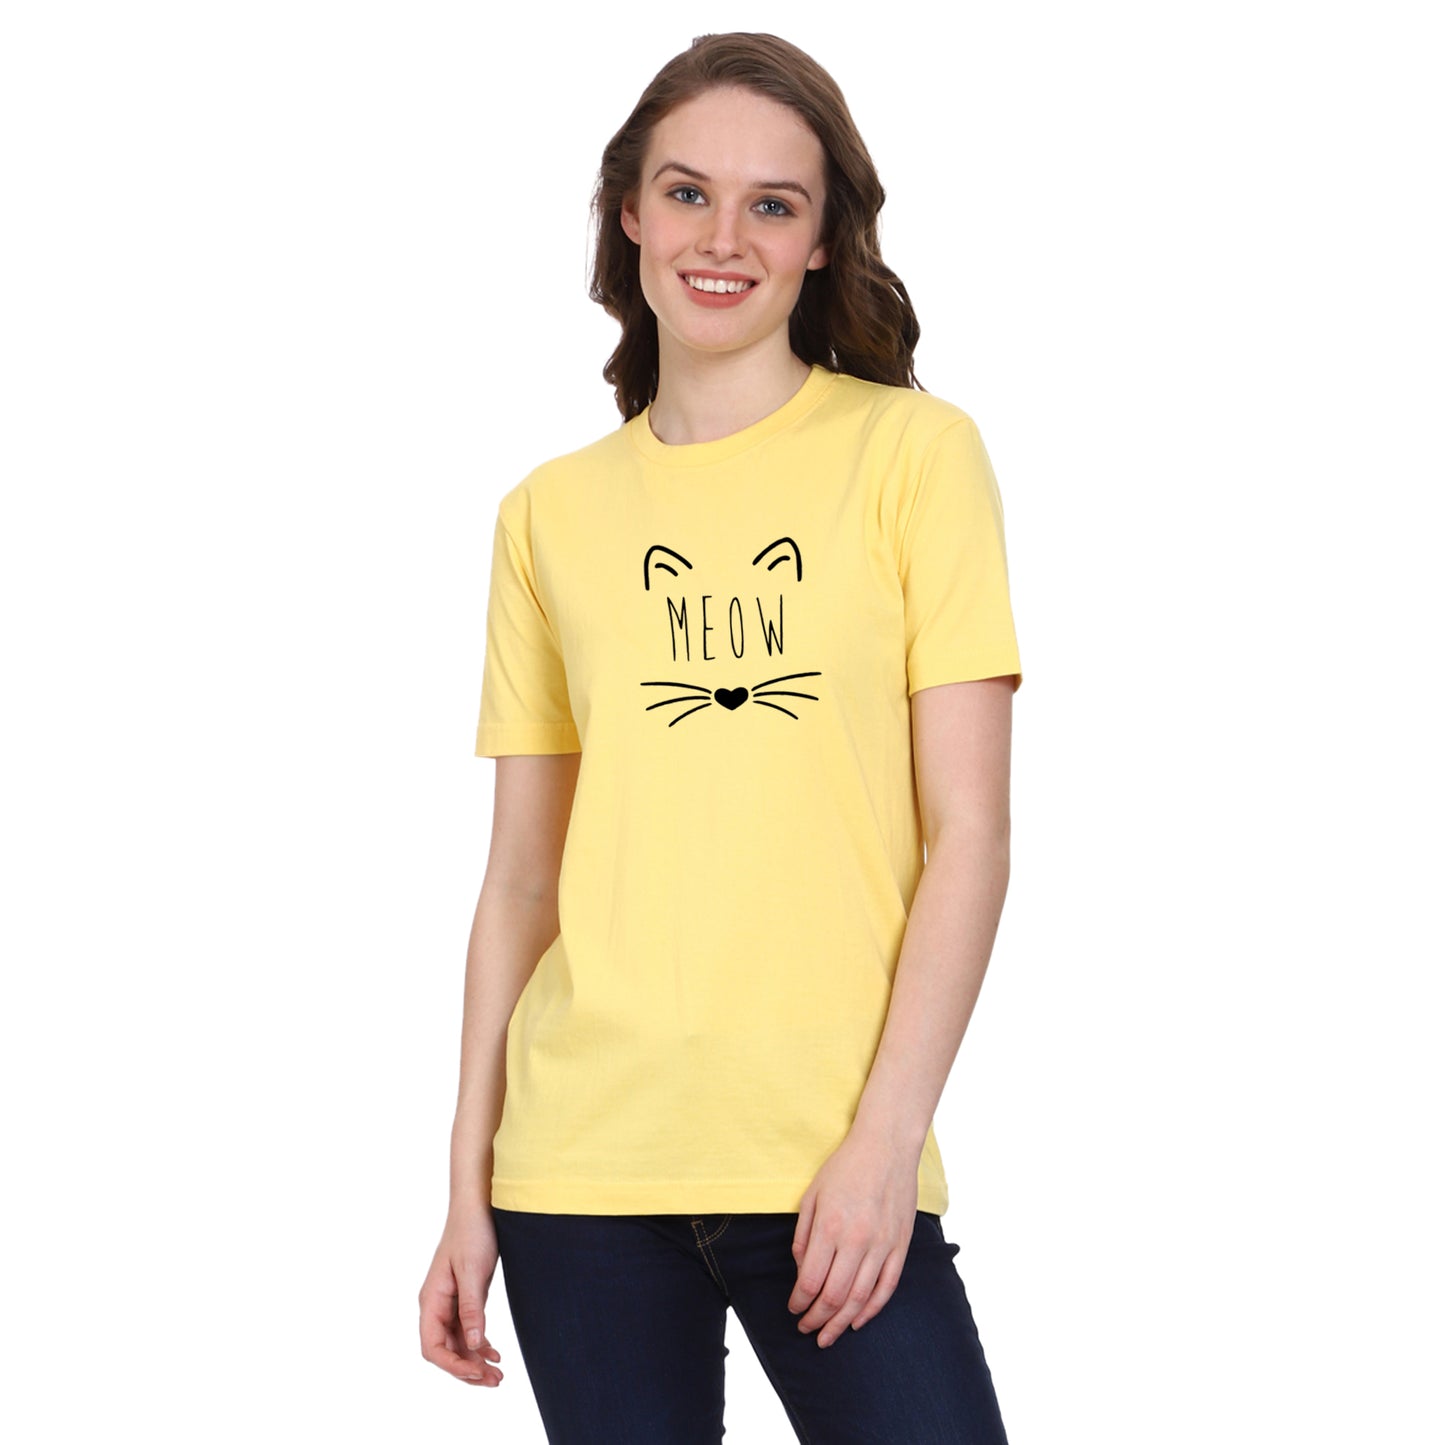 Meow Printed Women's Half Sleeves T-shirt For Cat Lovers